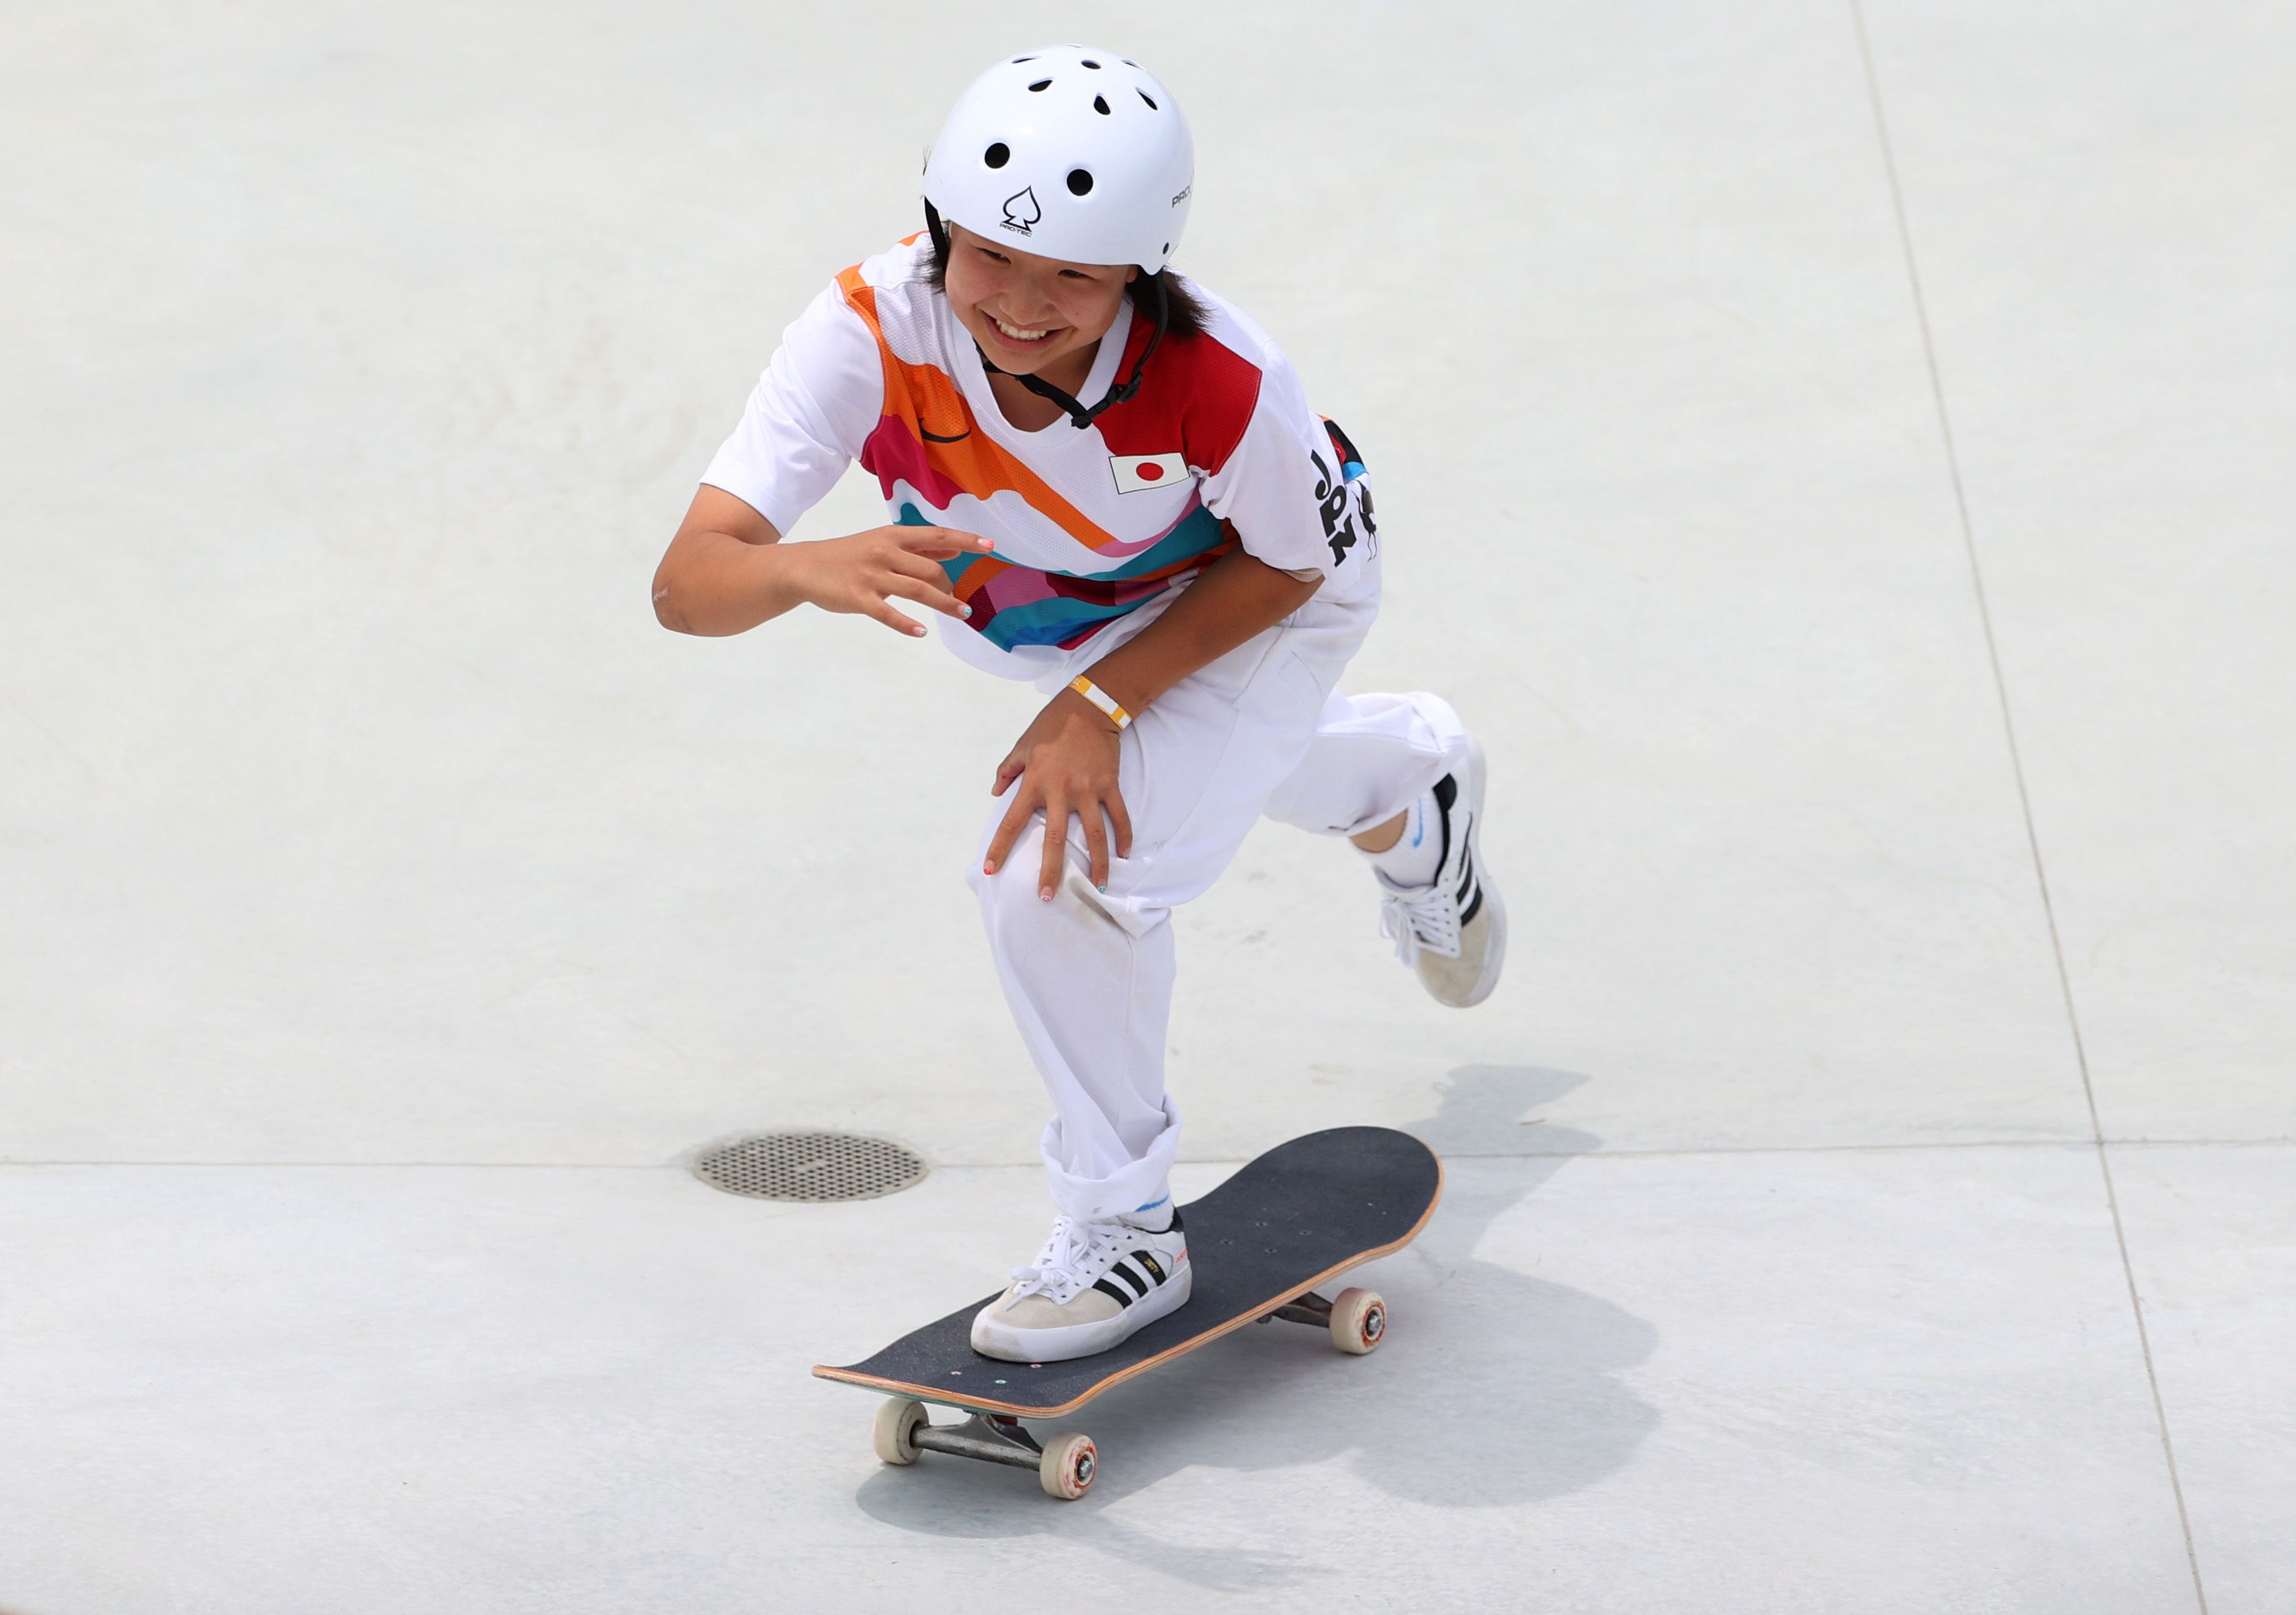 Momiji Nishiya of Team Japan competes during the Women's Street Final on day three of the Tokyo Olympic Games at Ariake Urban Sports Park on July 26